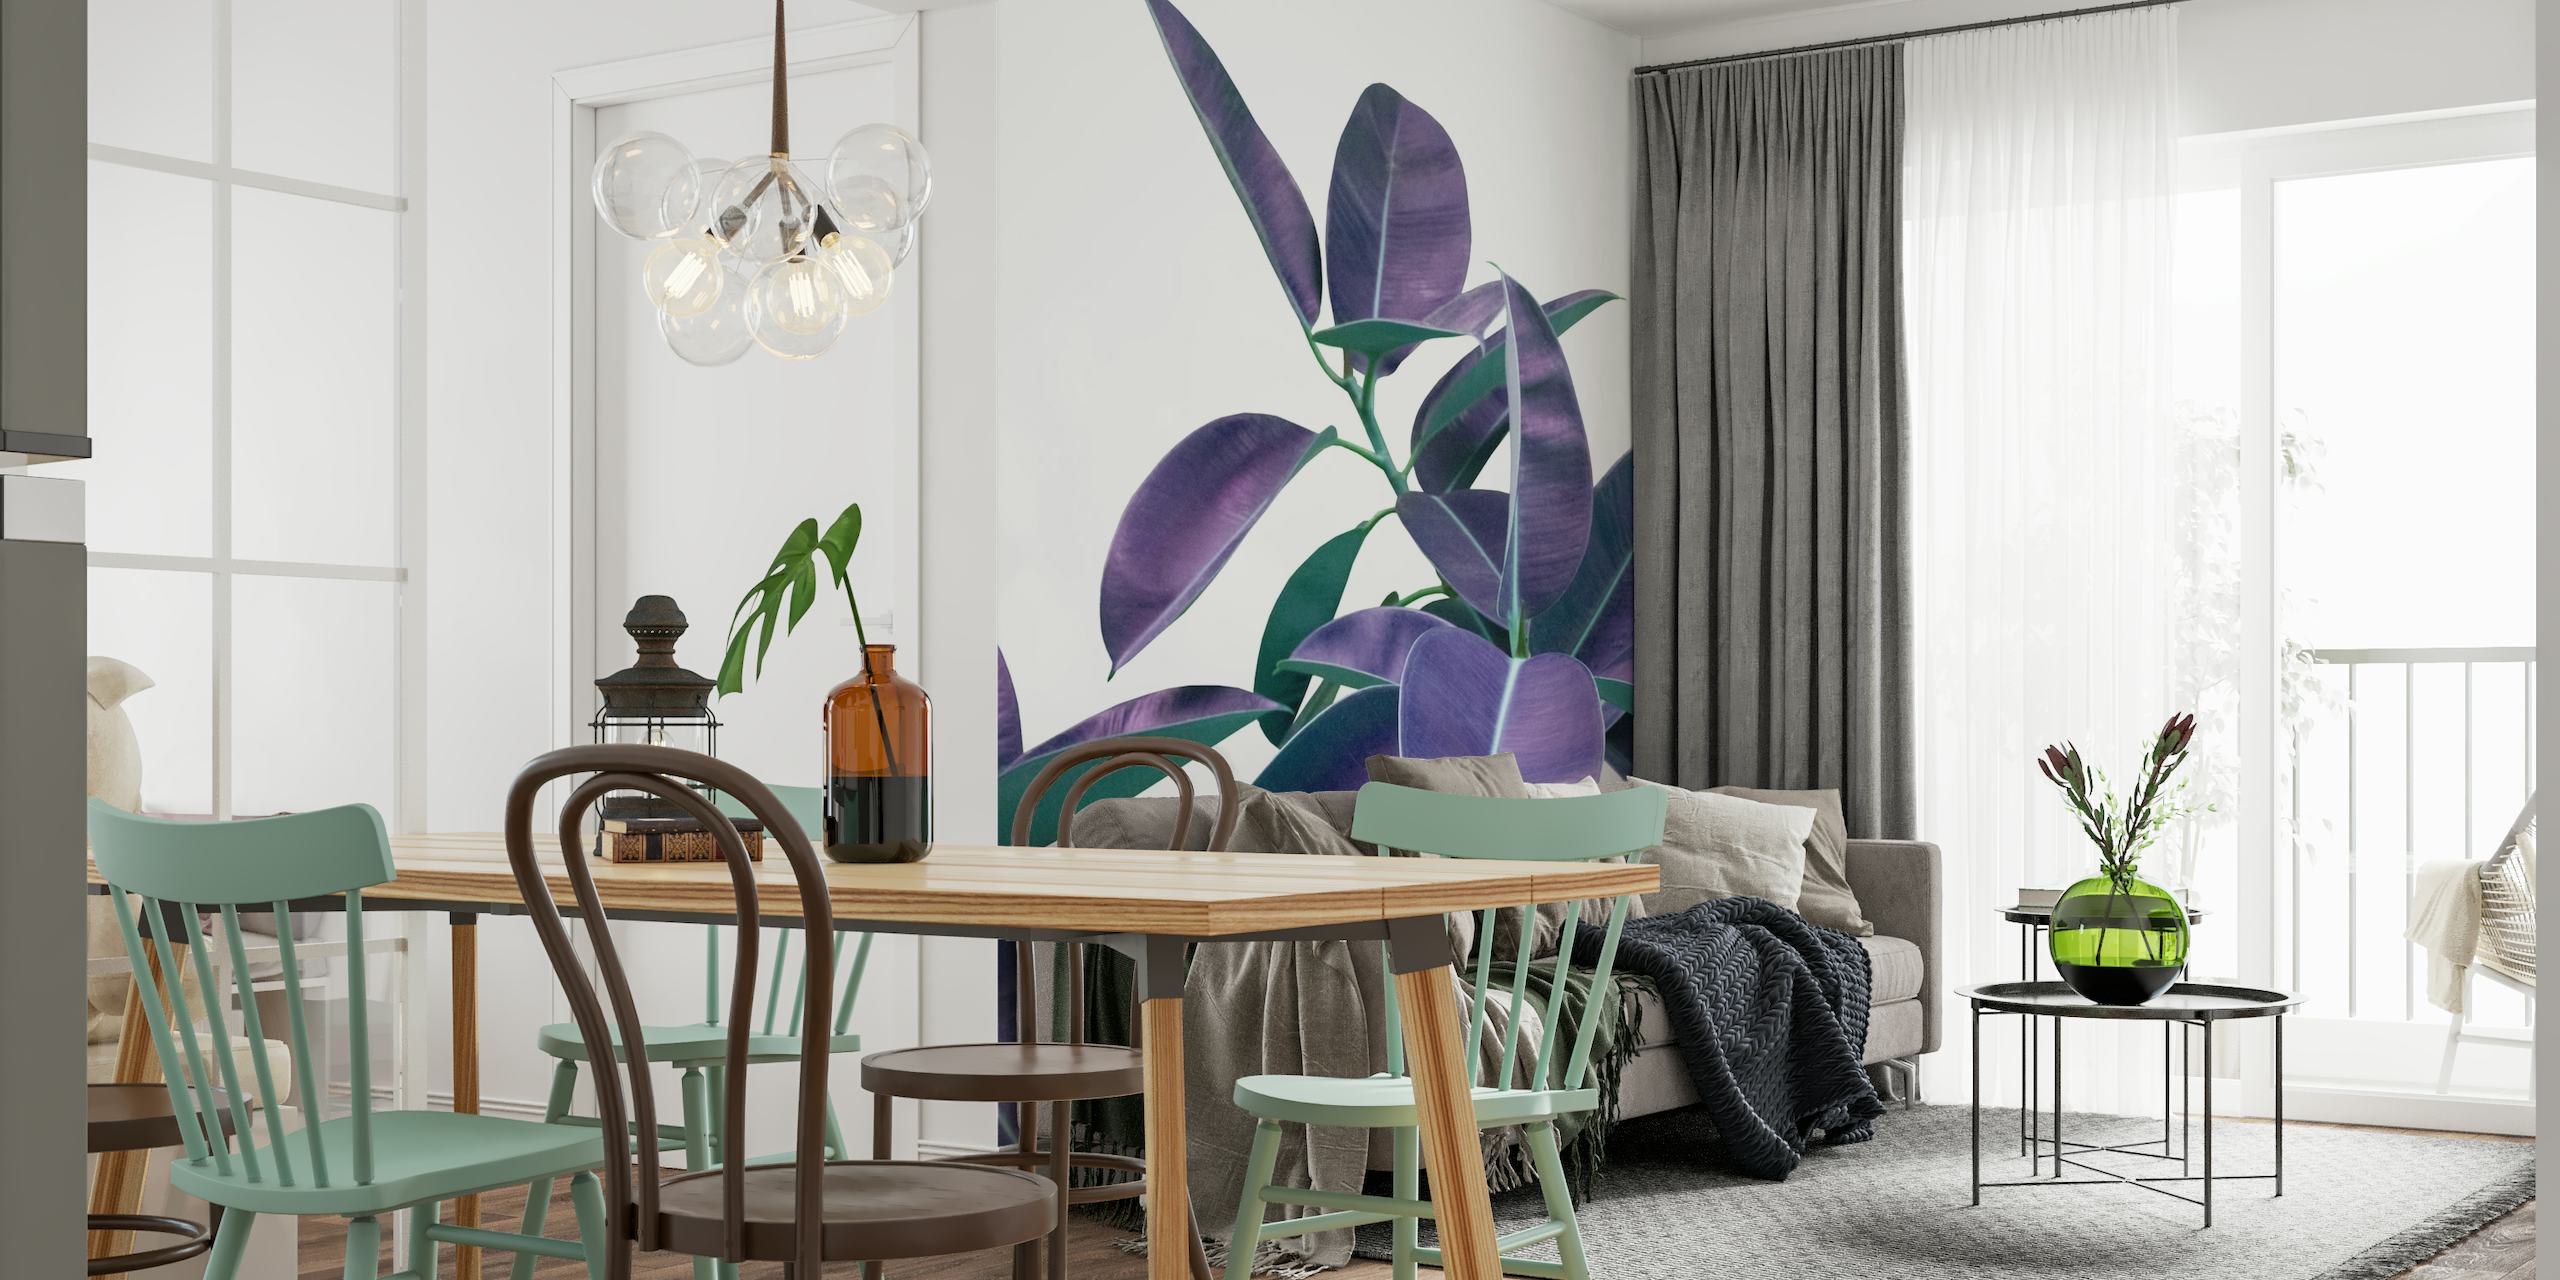 Ficus Elastica Violet Green leaves wall mural for interior decor